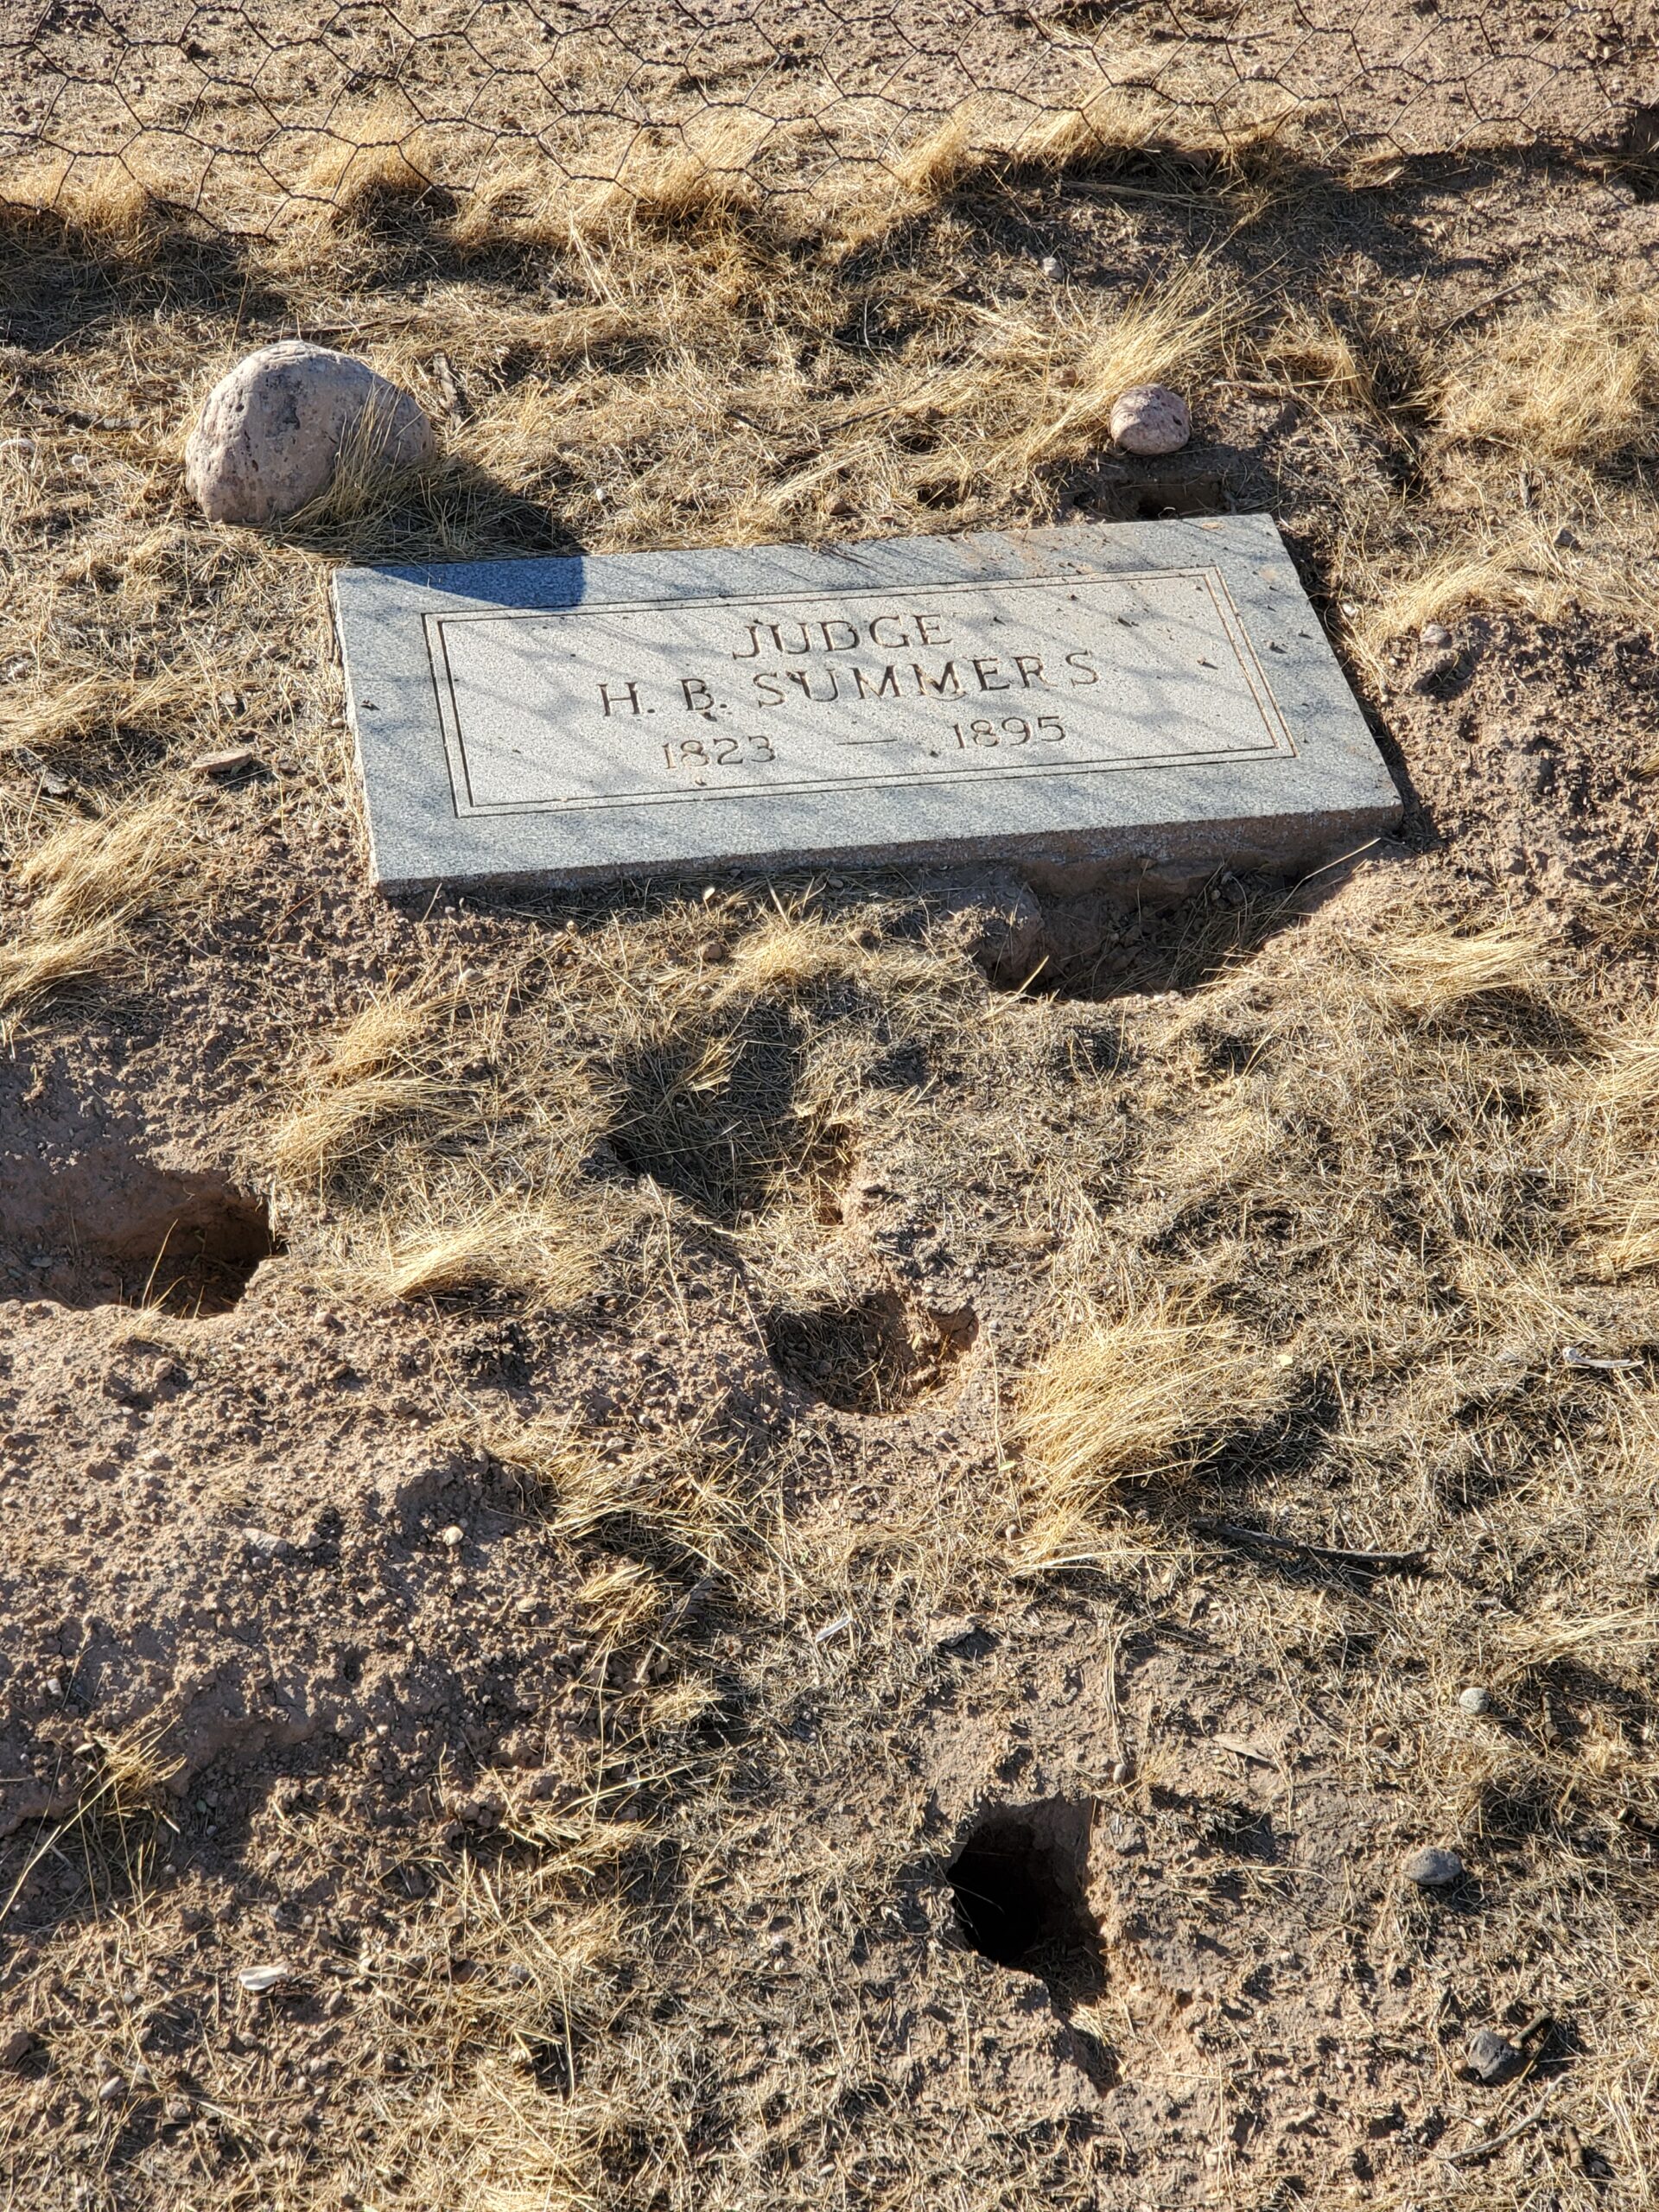 This simple headstone marks the final resting place of a judge from before Arizona became a state